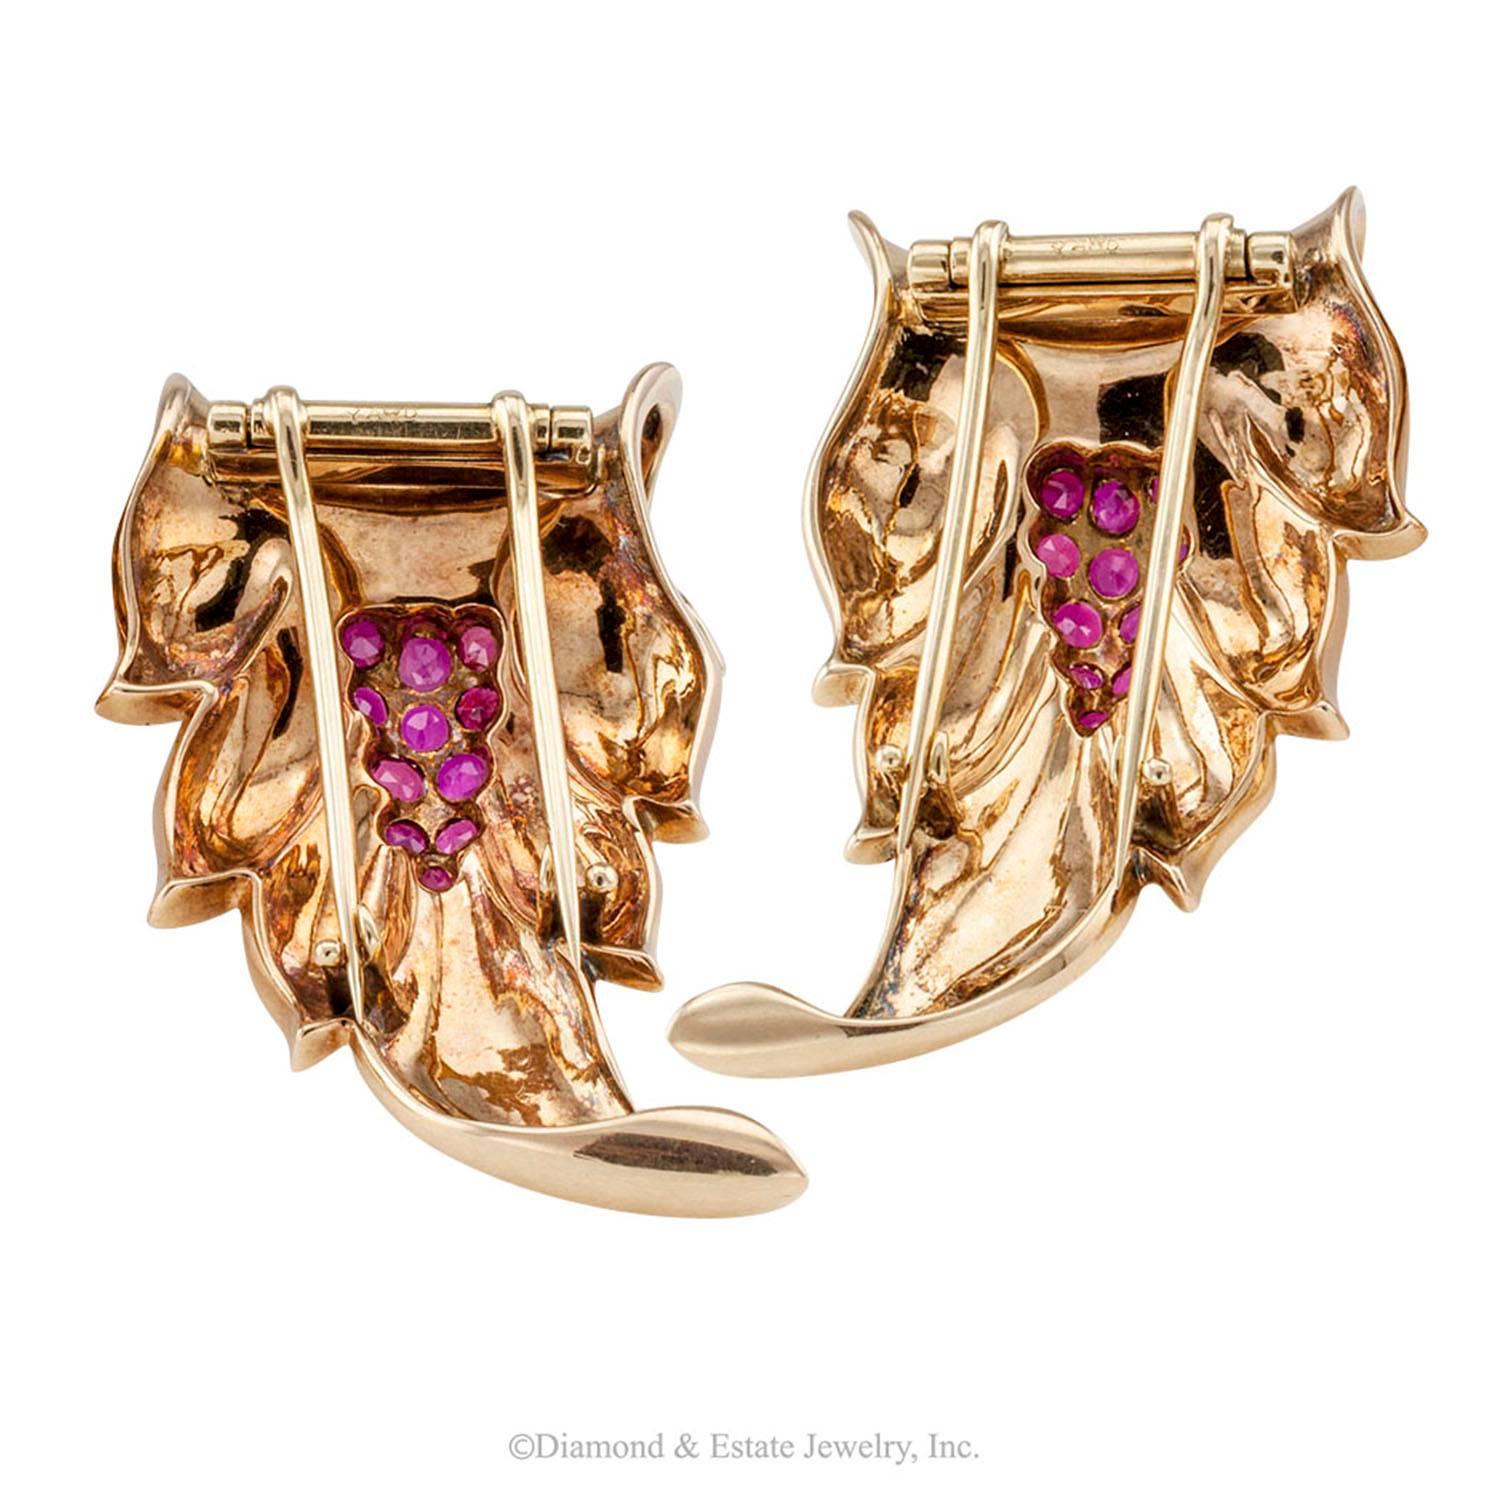 Raymond Yard 1940s Acanthus Leaves Retro Clip Brooches Gold Ruby Diamond

Raymond Yard retro ruby diamond and 14-karat gold acanthus leaves clip brooches circa 1940.  This is a very fine example of great American jewelry. Stylized acanthus leaves